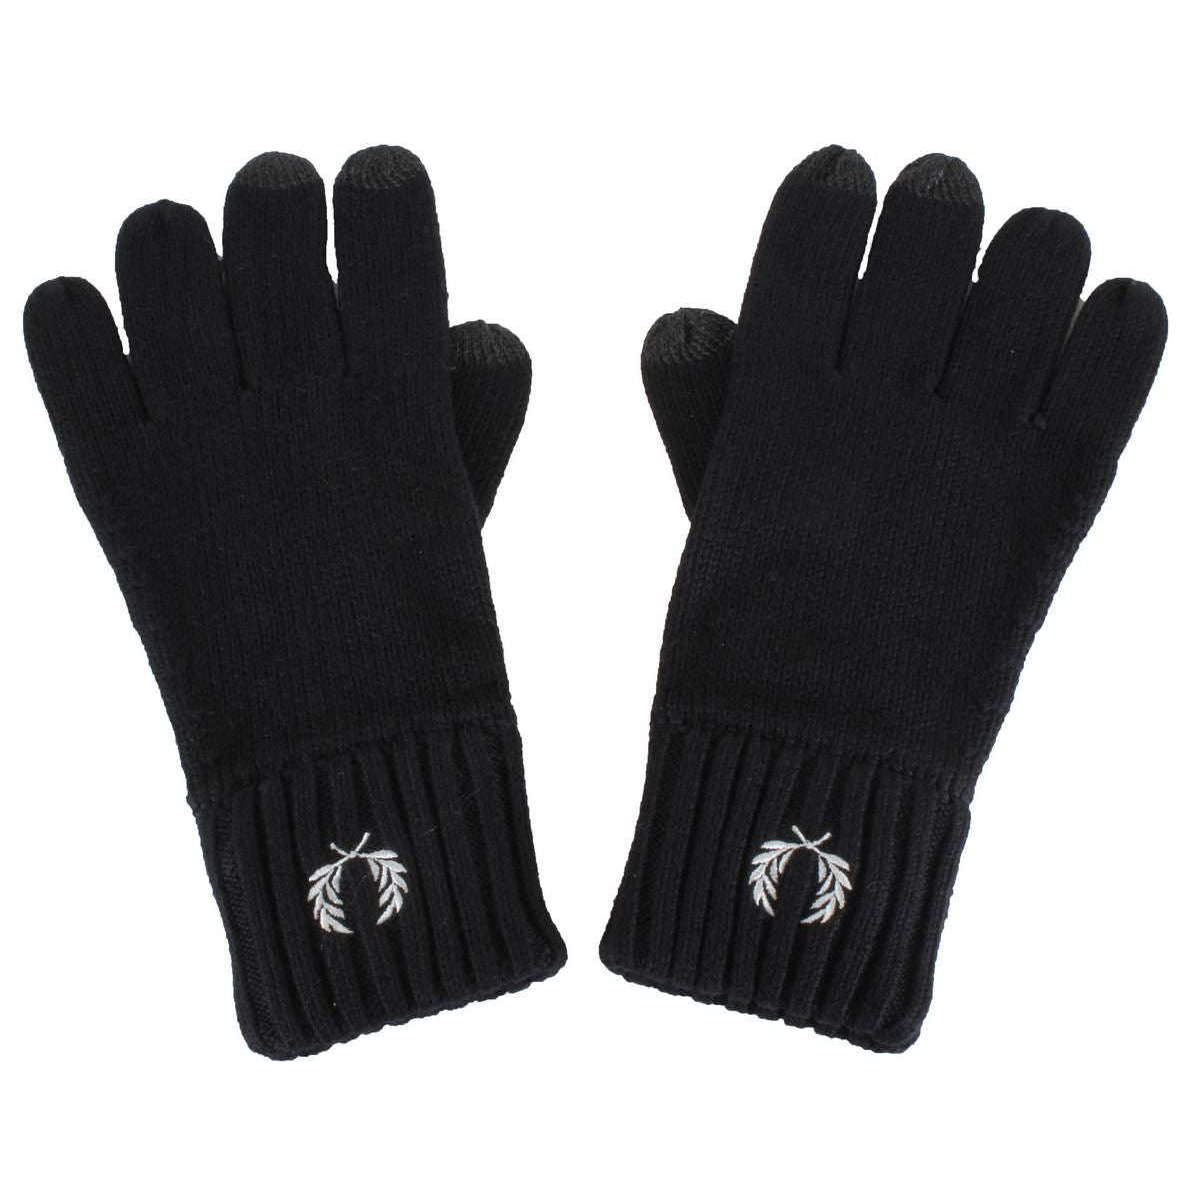 Fred Perry Laurel Wreath Gloves  - Black